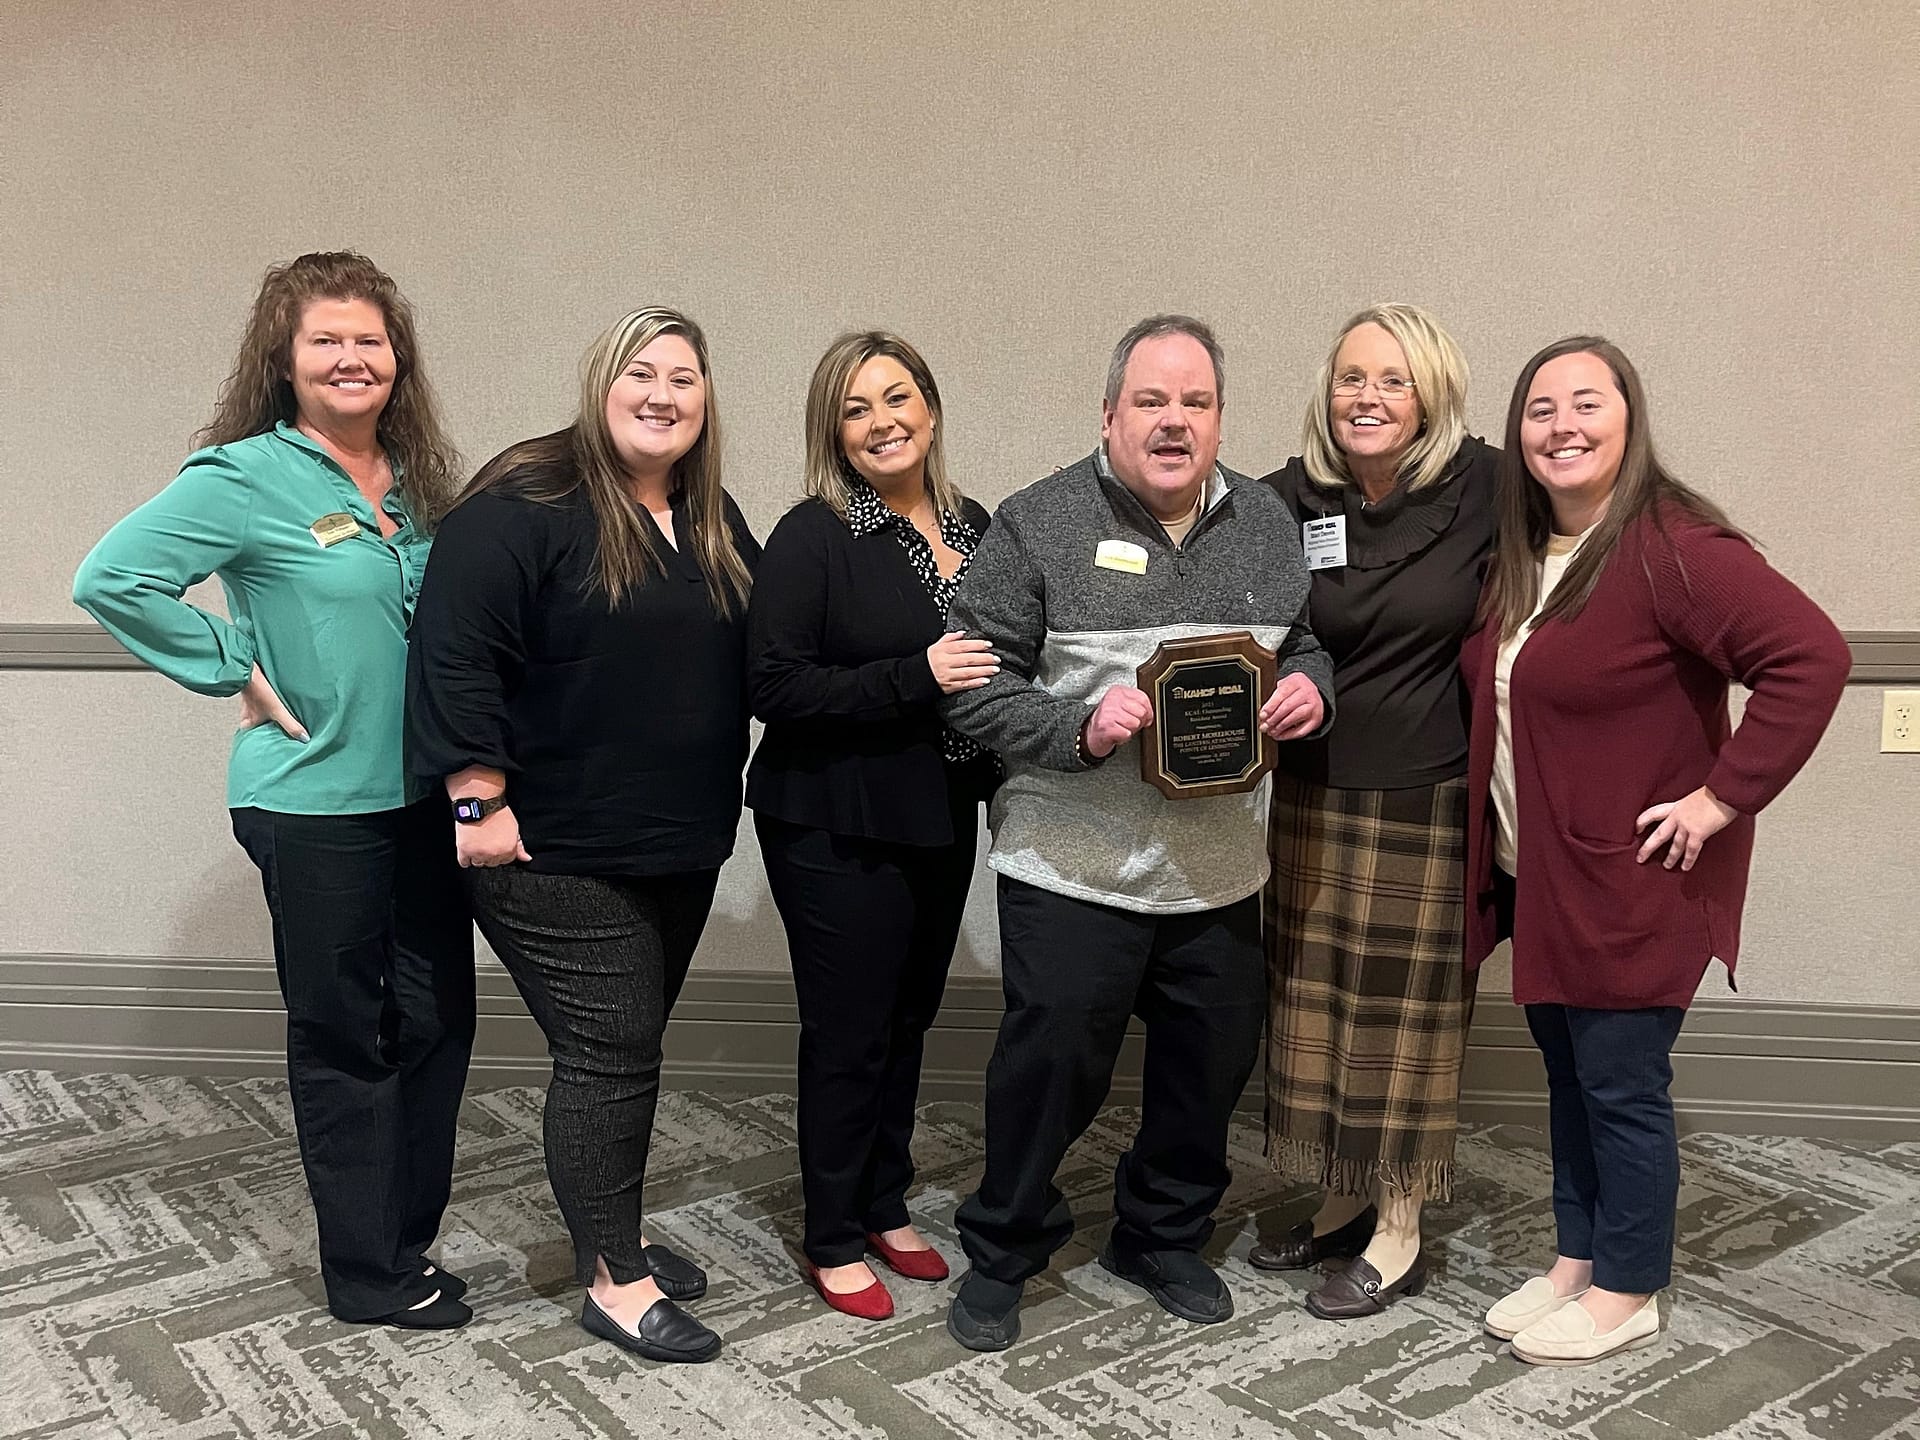 photo of Bob Morehouse, winner of the Outstanding Resident Award, with his team from The Lantern at Morning Pointe of Lexington, where he resides, as well as regional associates